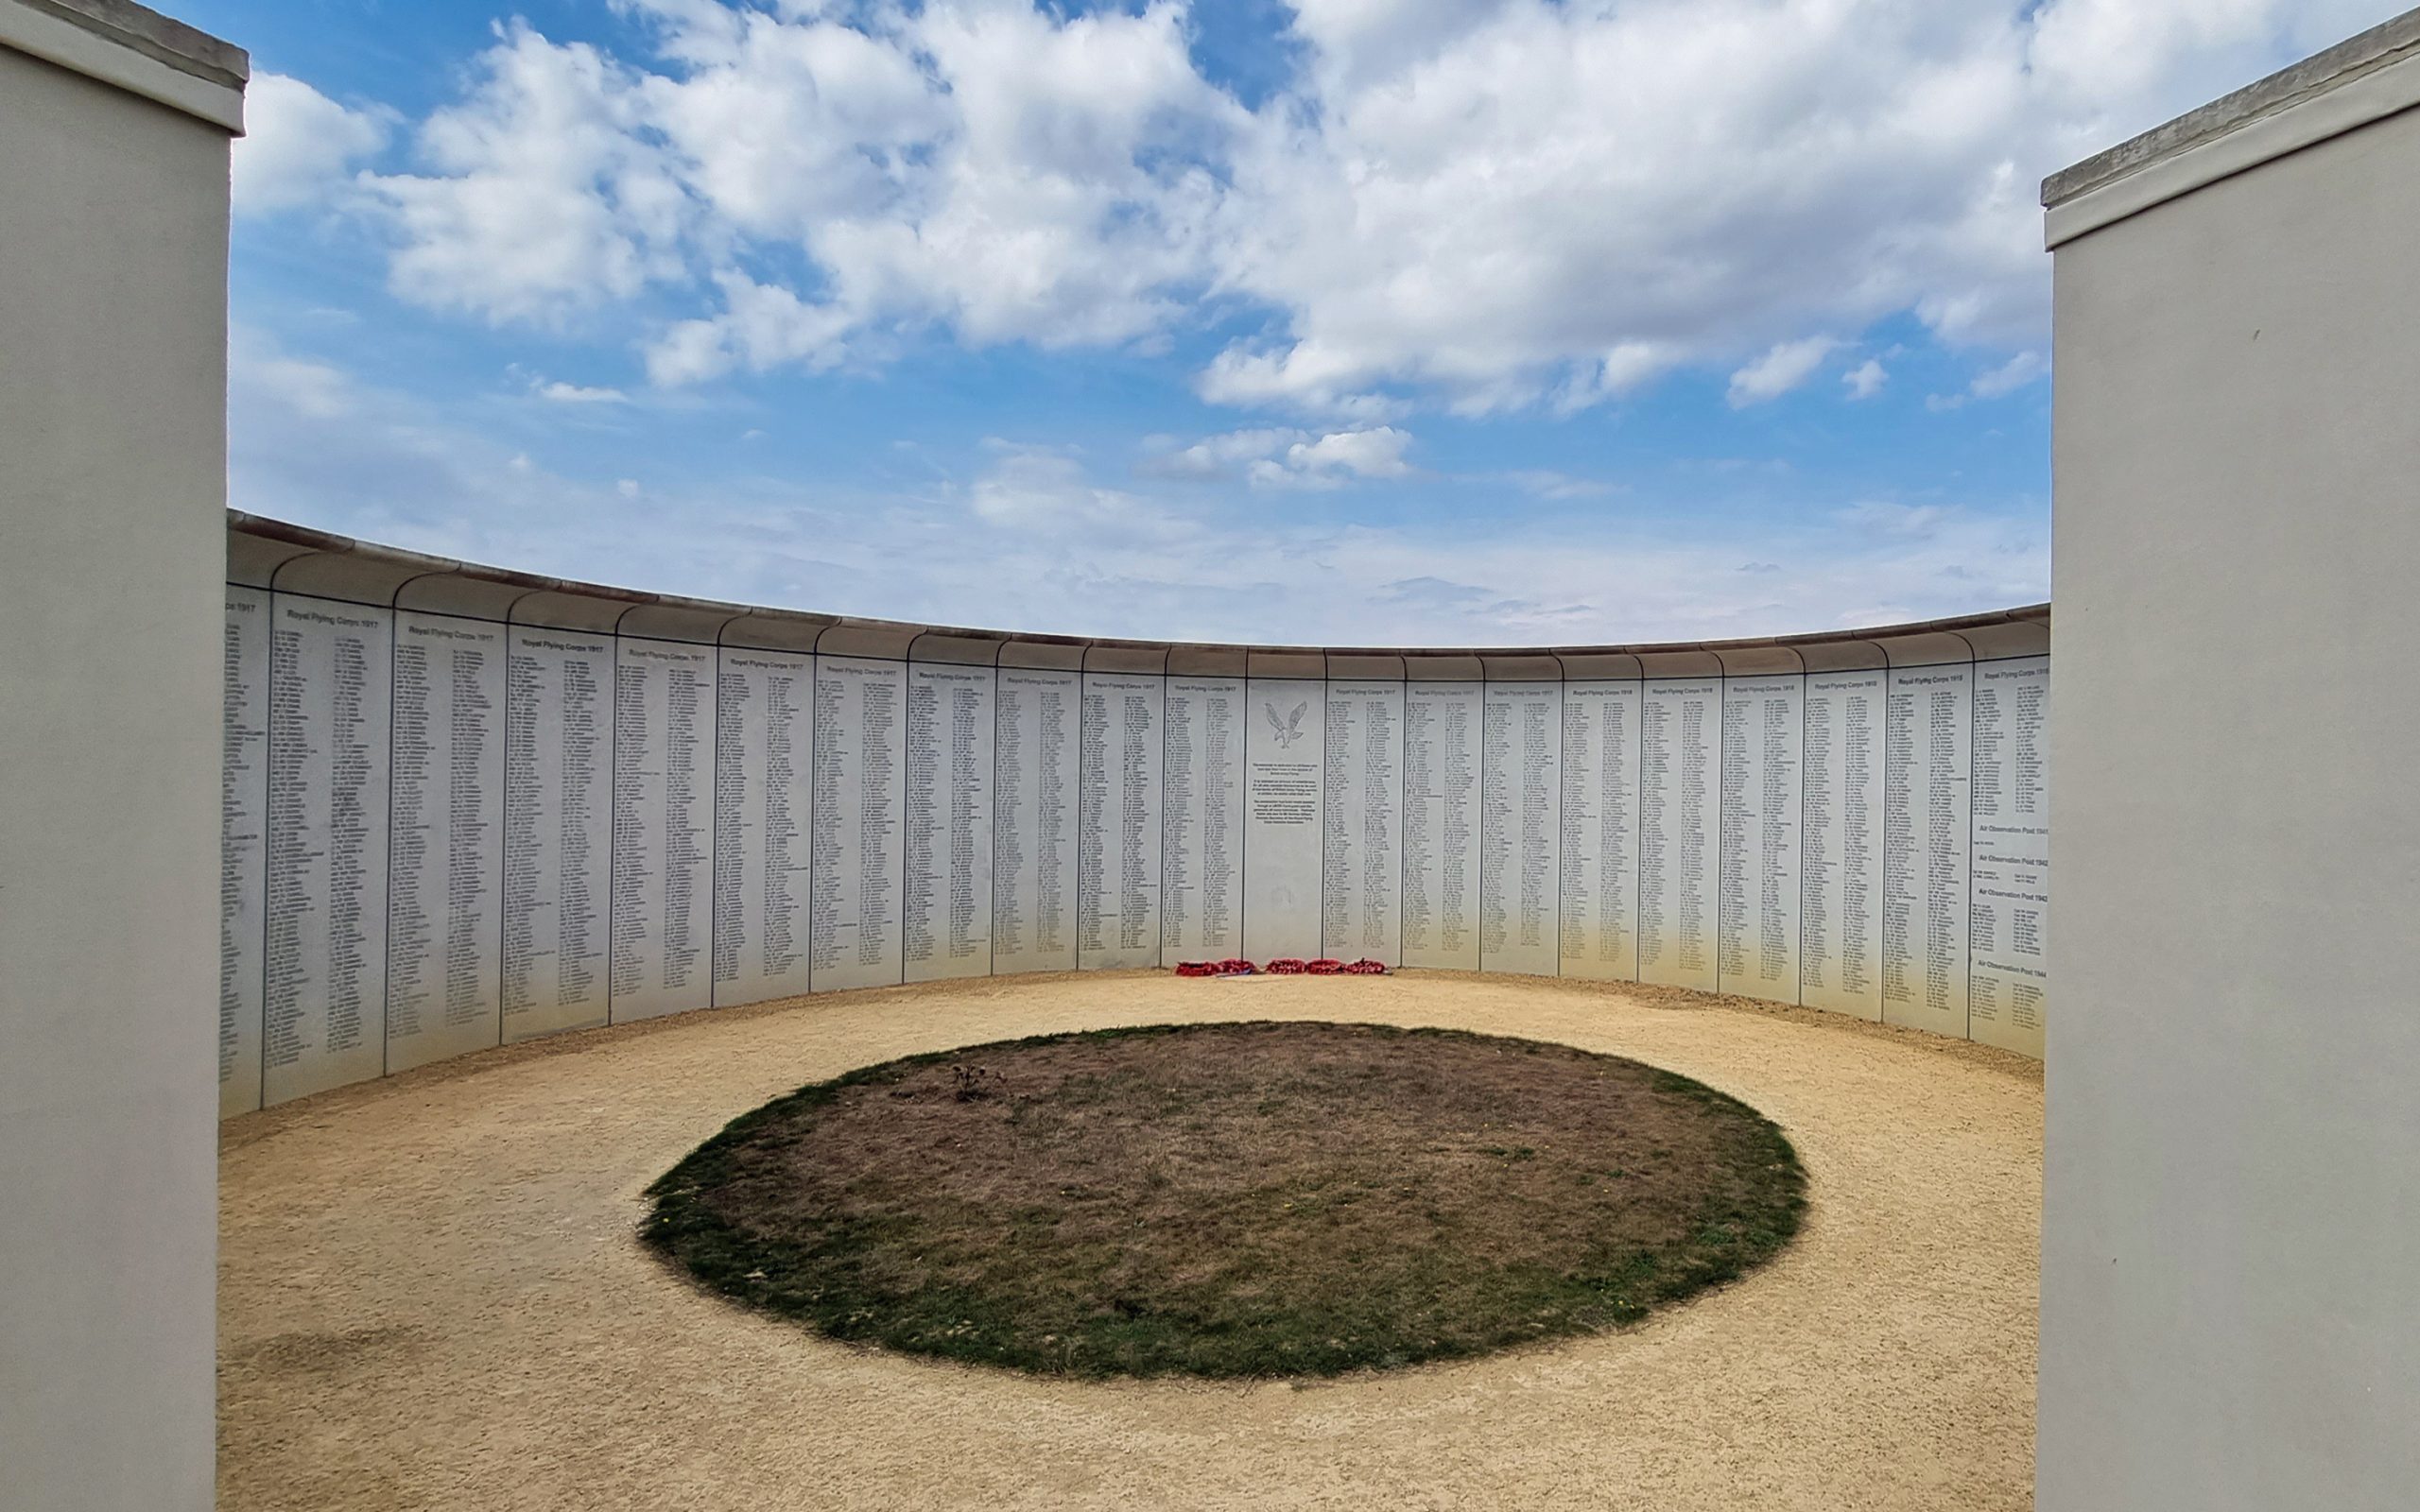 AAC Memorial at Middle Wallop | Wattisham Station Heritage Museum